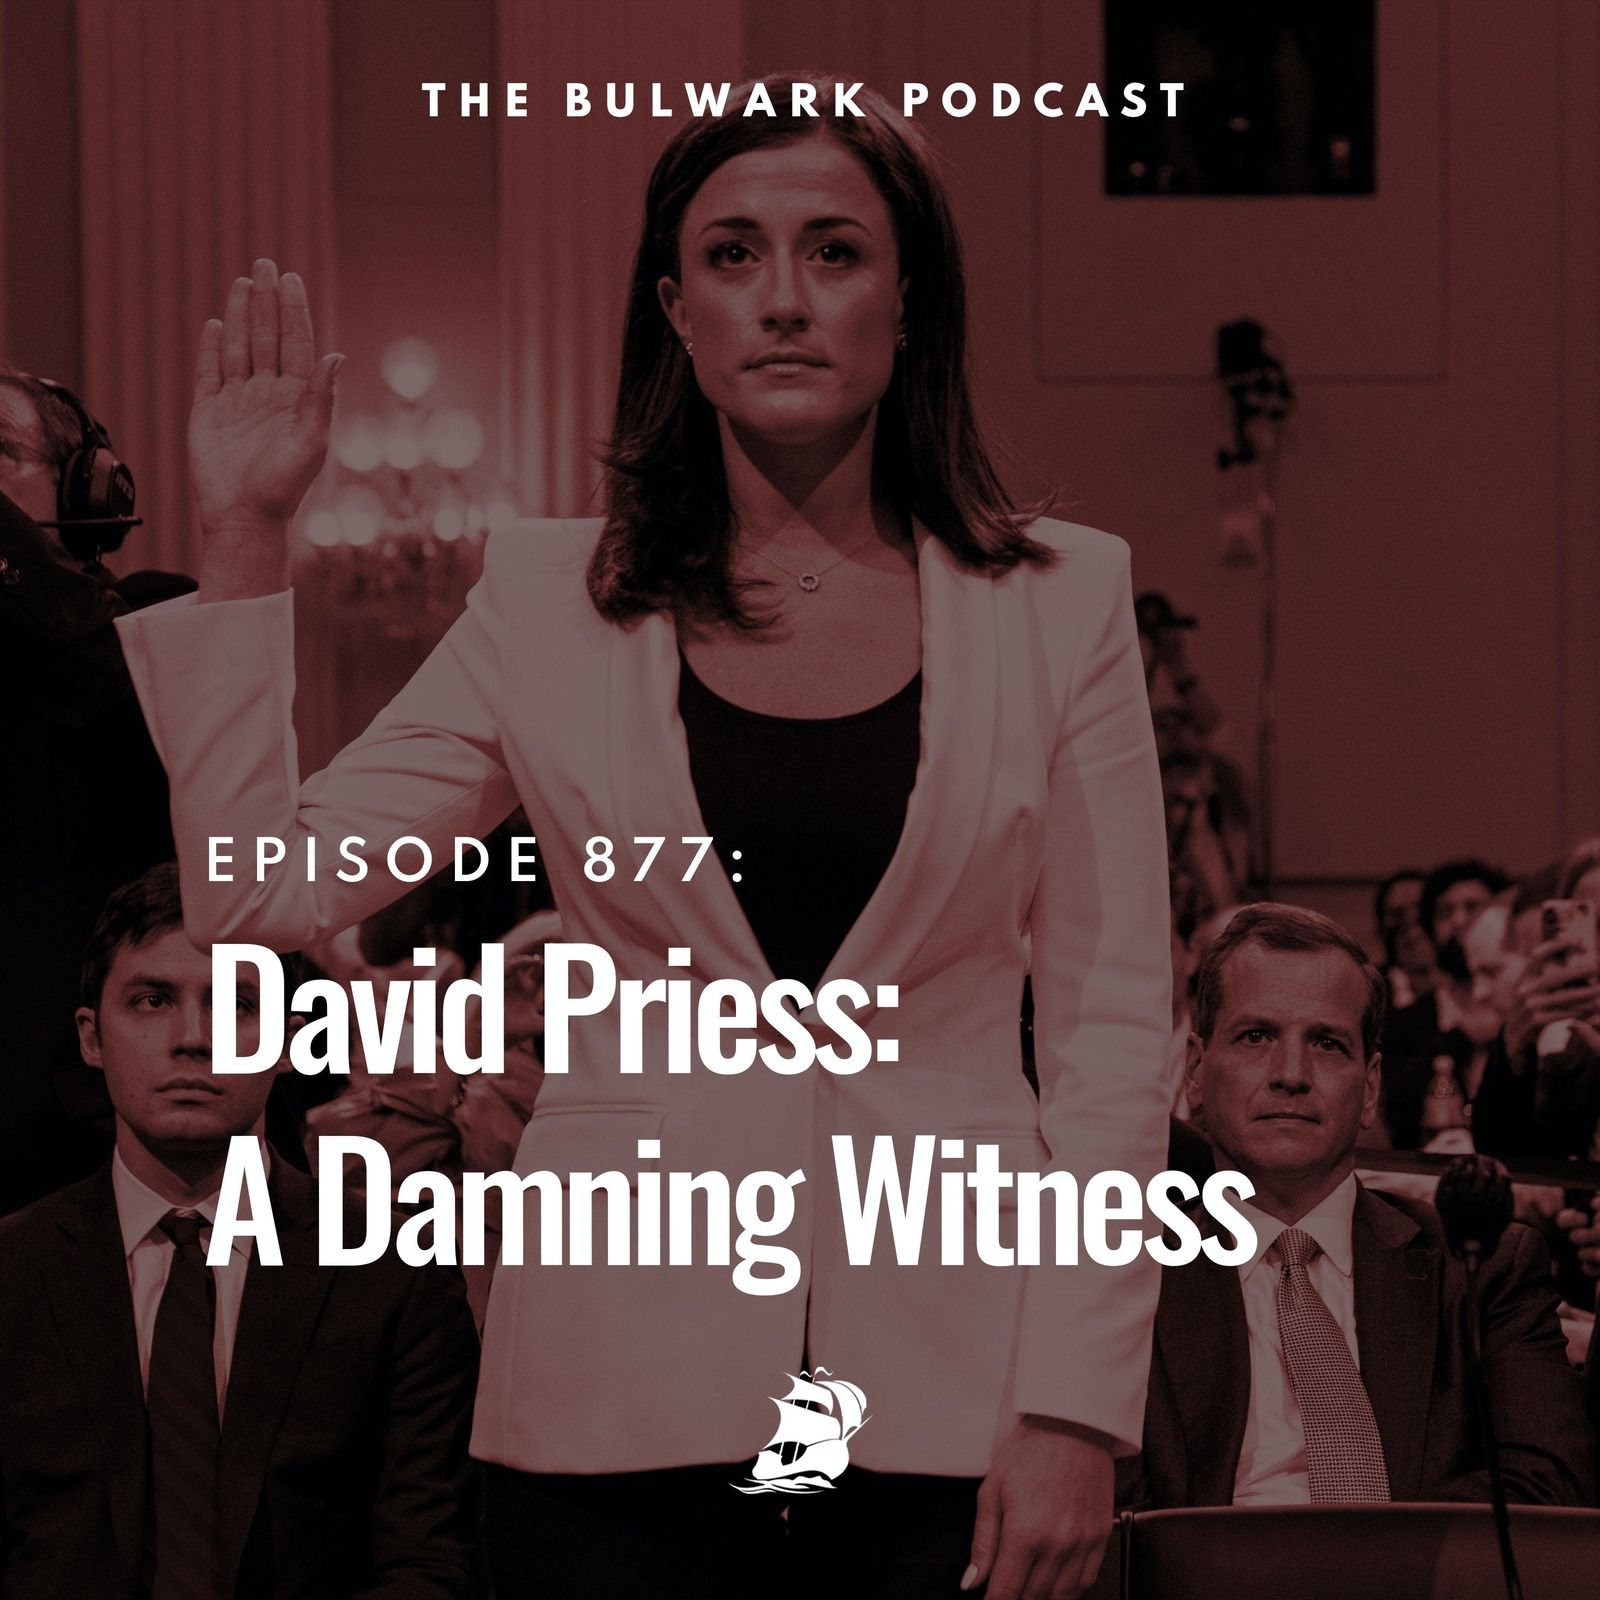 David Priess: A Damning Witness by The Bulwark Podcast